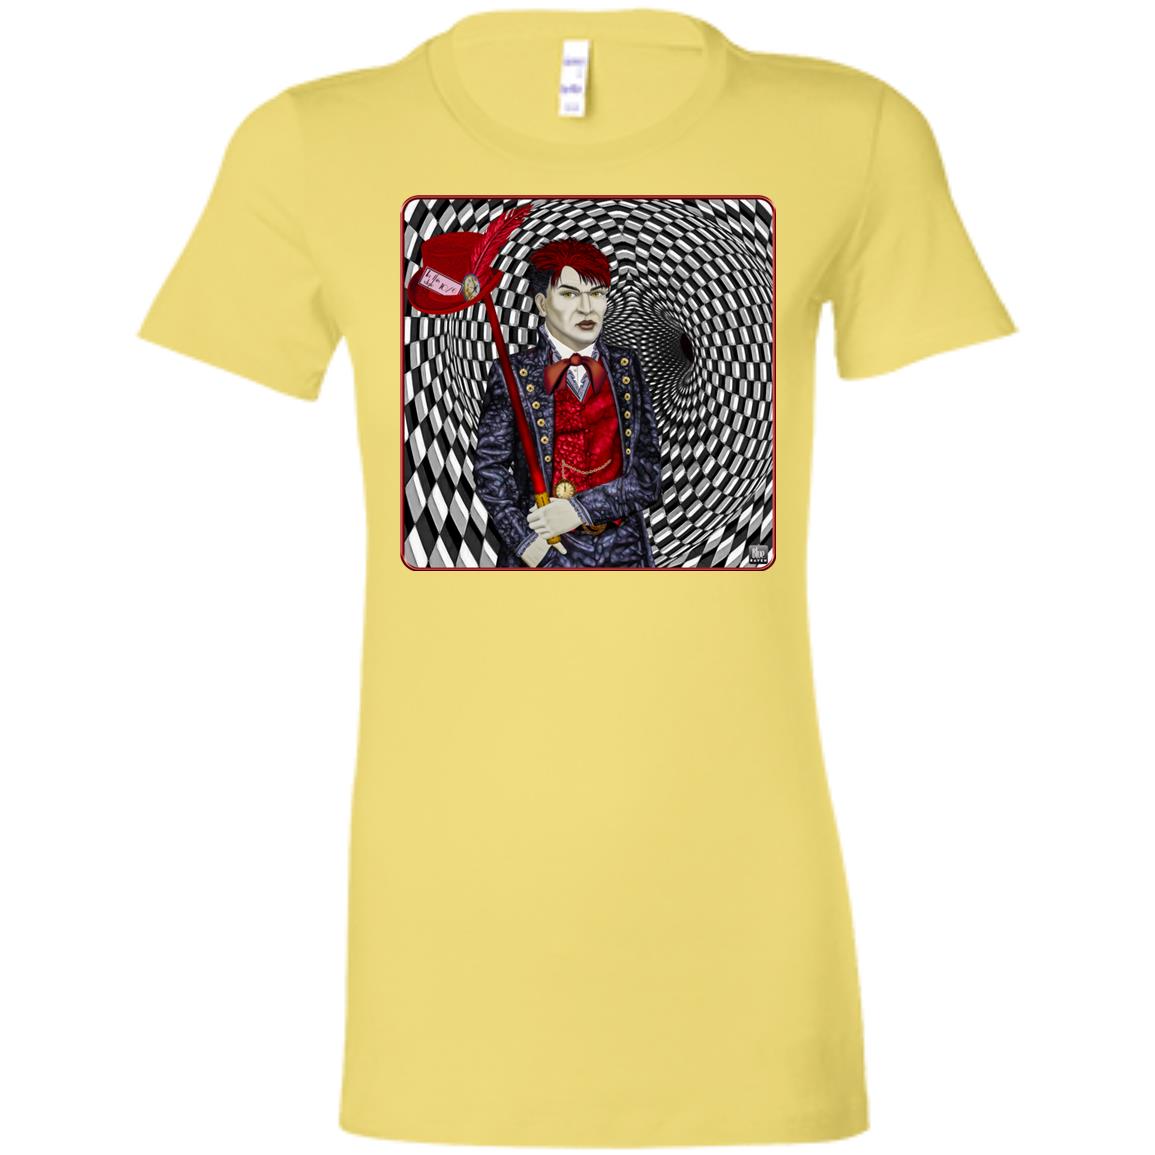 PORTRAIT OF A MAD HATTER - Women's Fitted T-Shirt